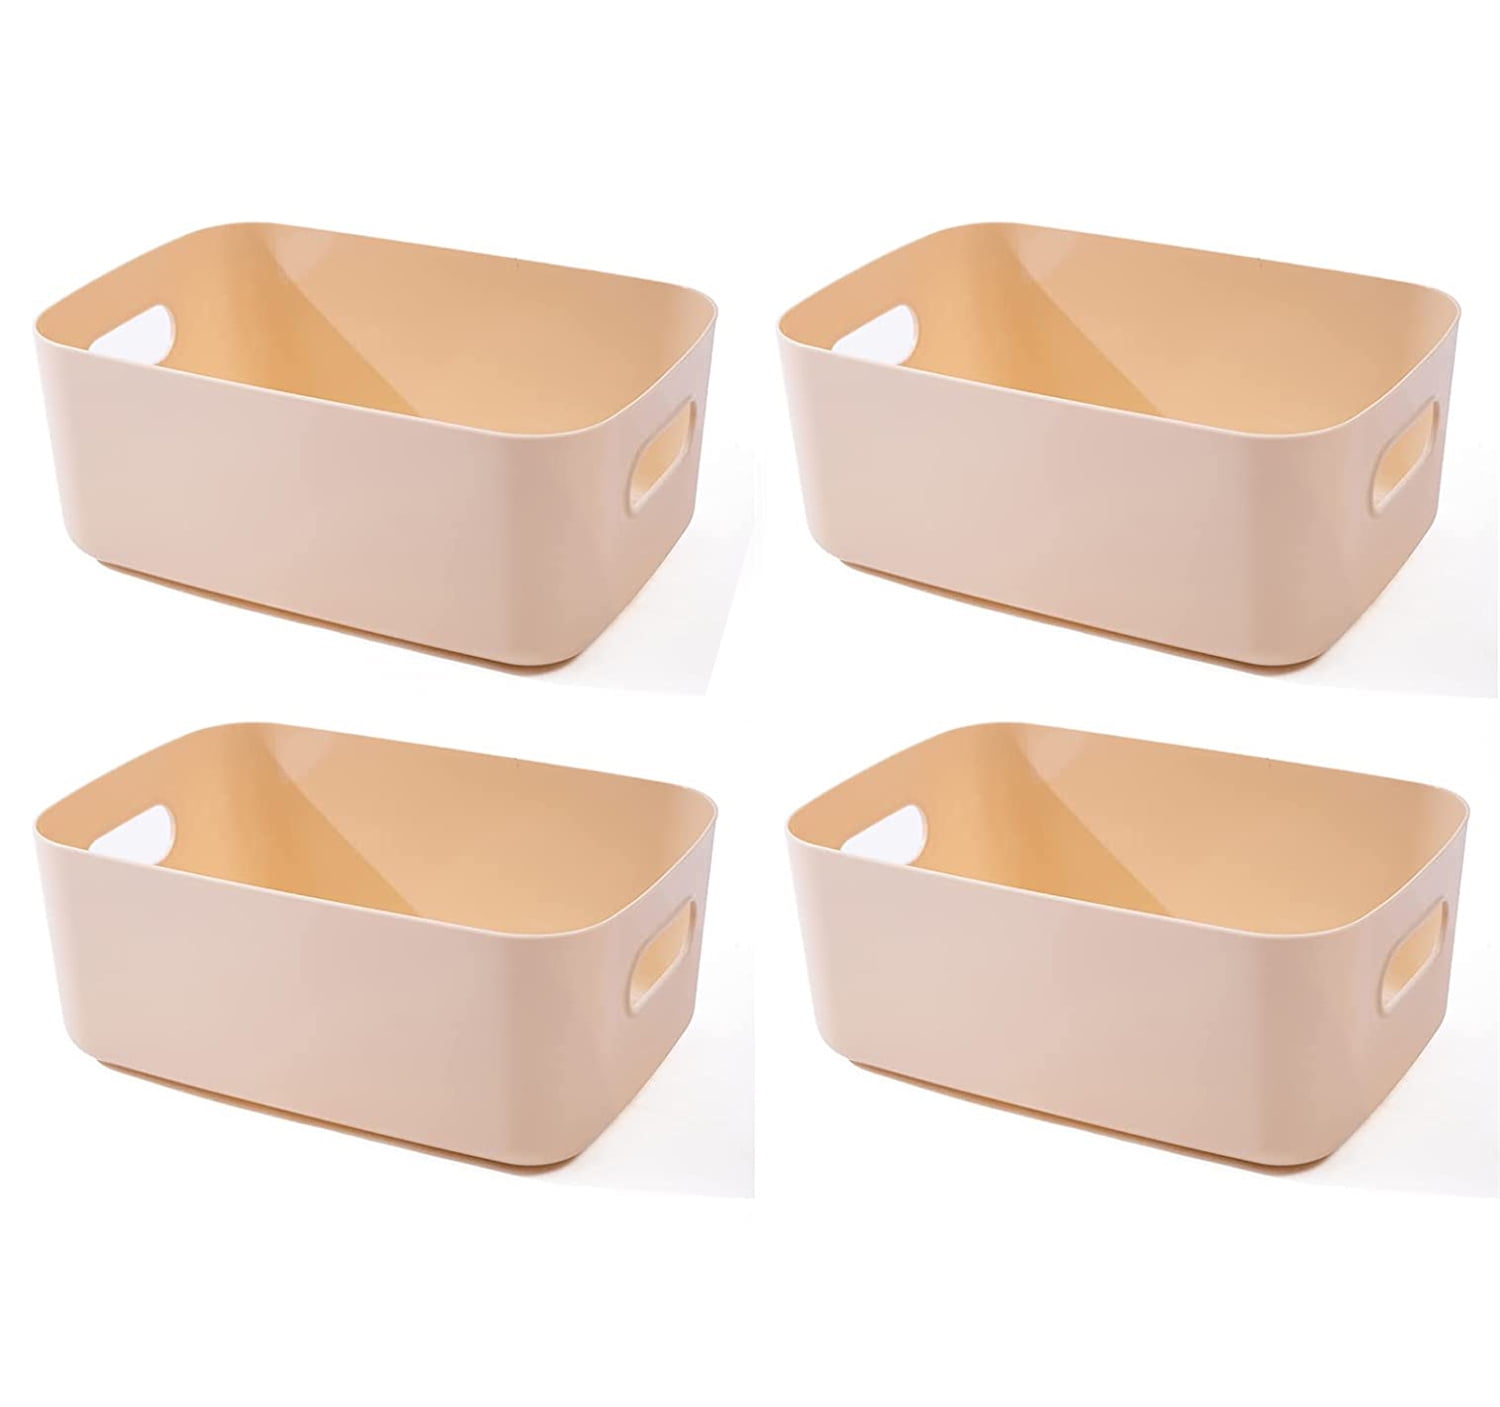 Casewin 4 Pack Plastic Storage Baskets,9.6*6.3*3.9in Household Organizers  with Handles Small Pantry Organizer Basket Bins for Shelf, Countertops,  Desktops (Beige) 